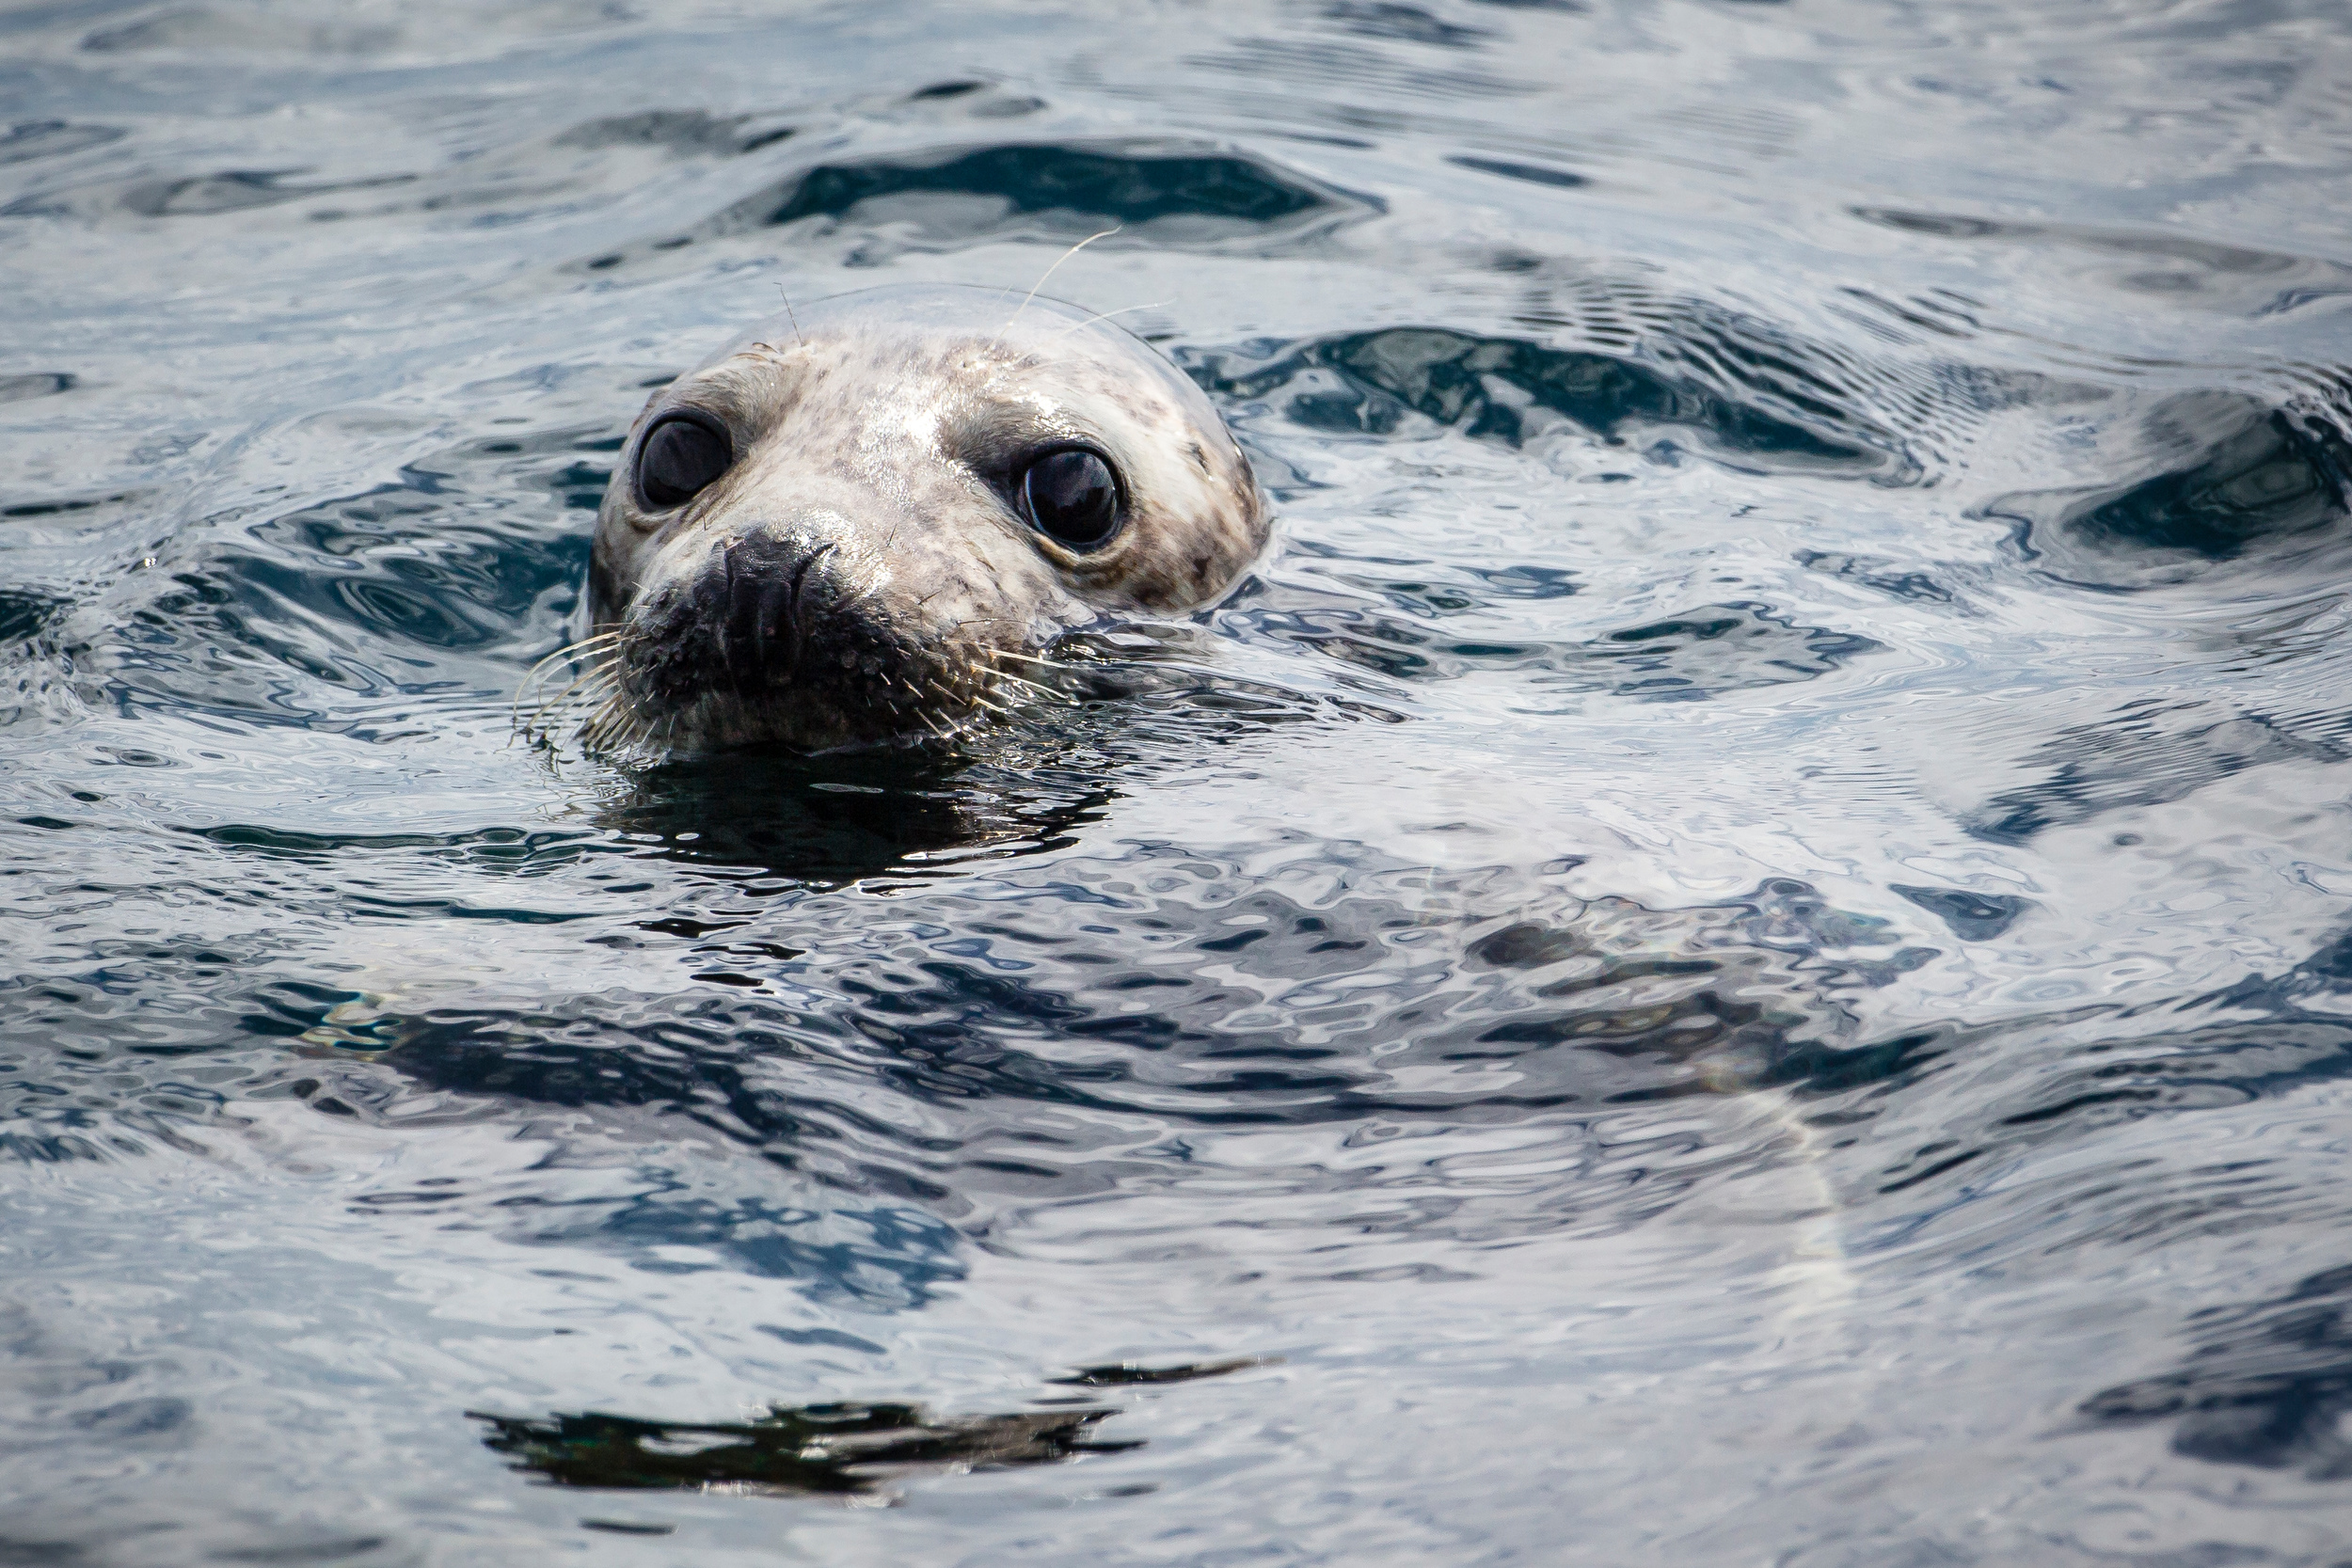 seal head poking out of water